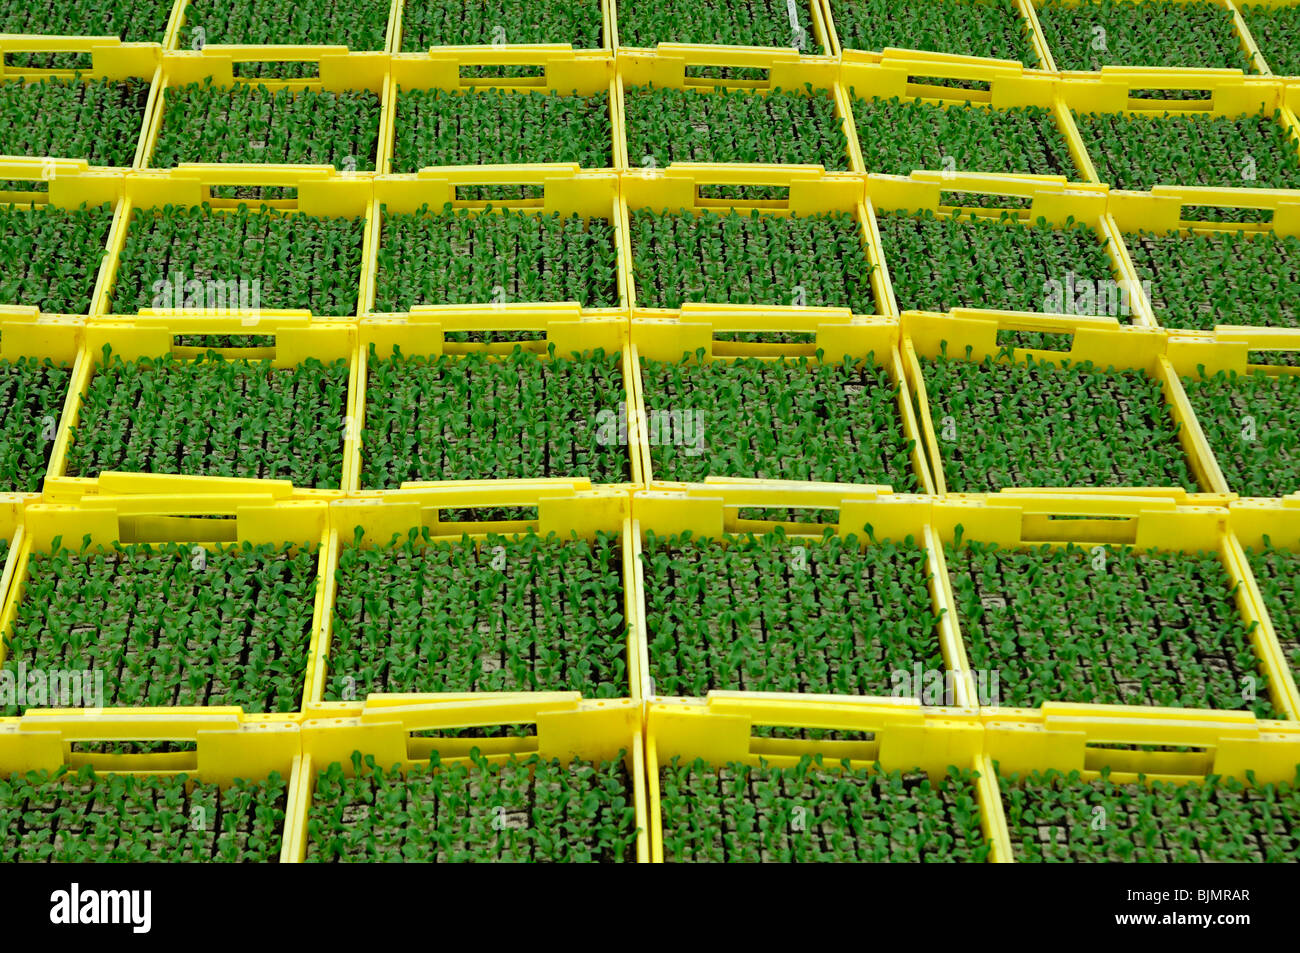 Seedlings in seed boxes in a greenhouse, nursery Stock Photo